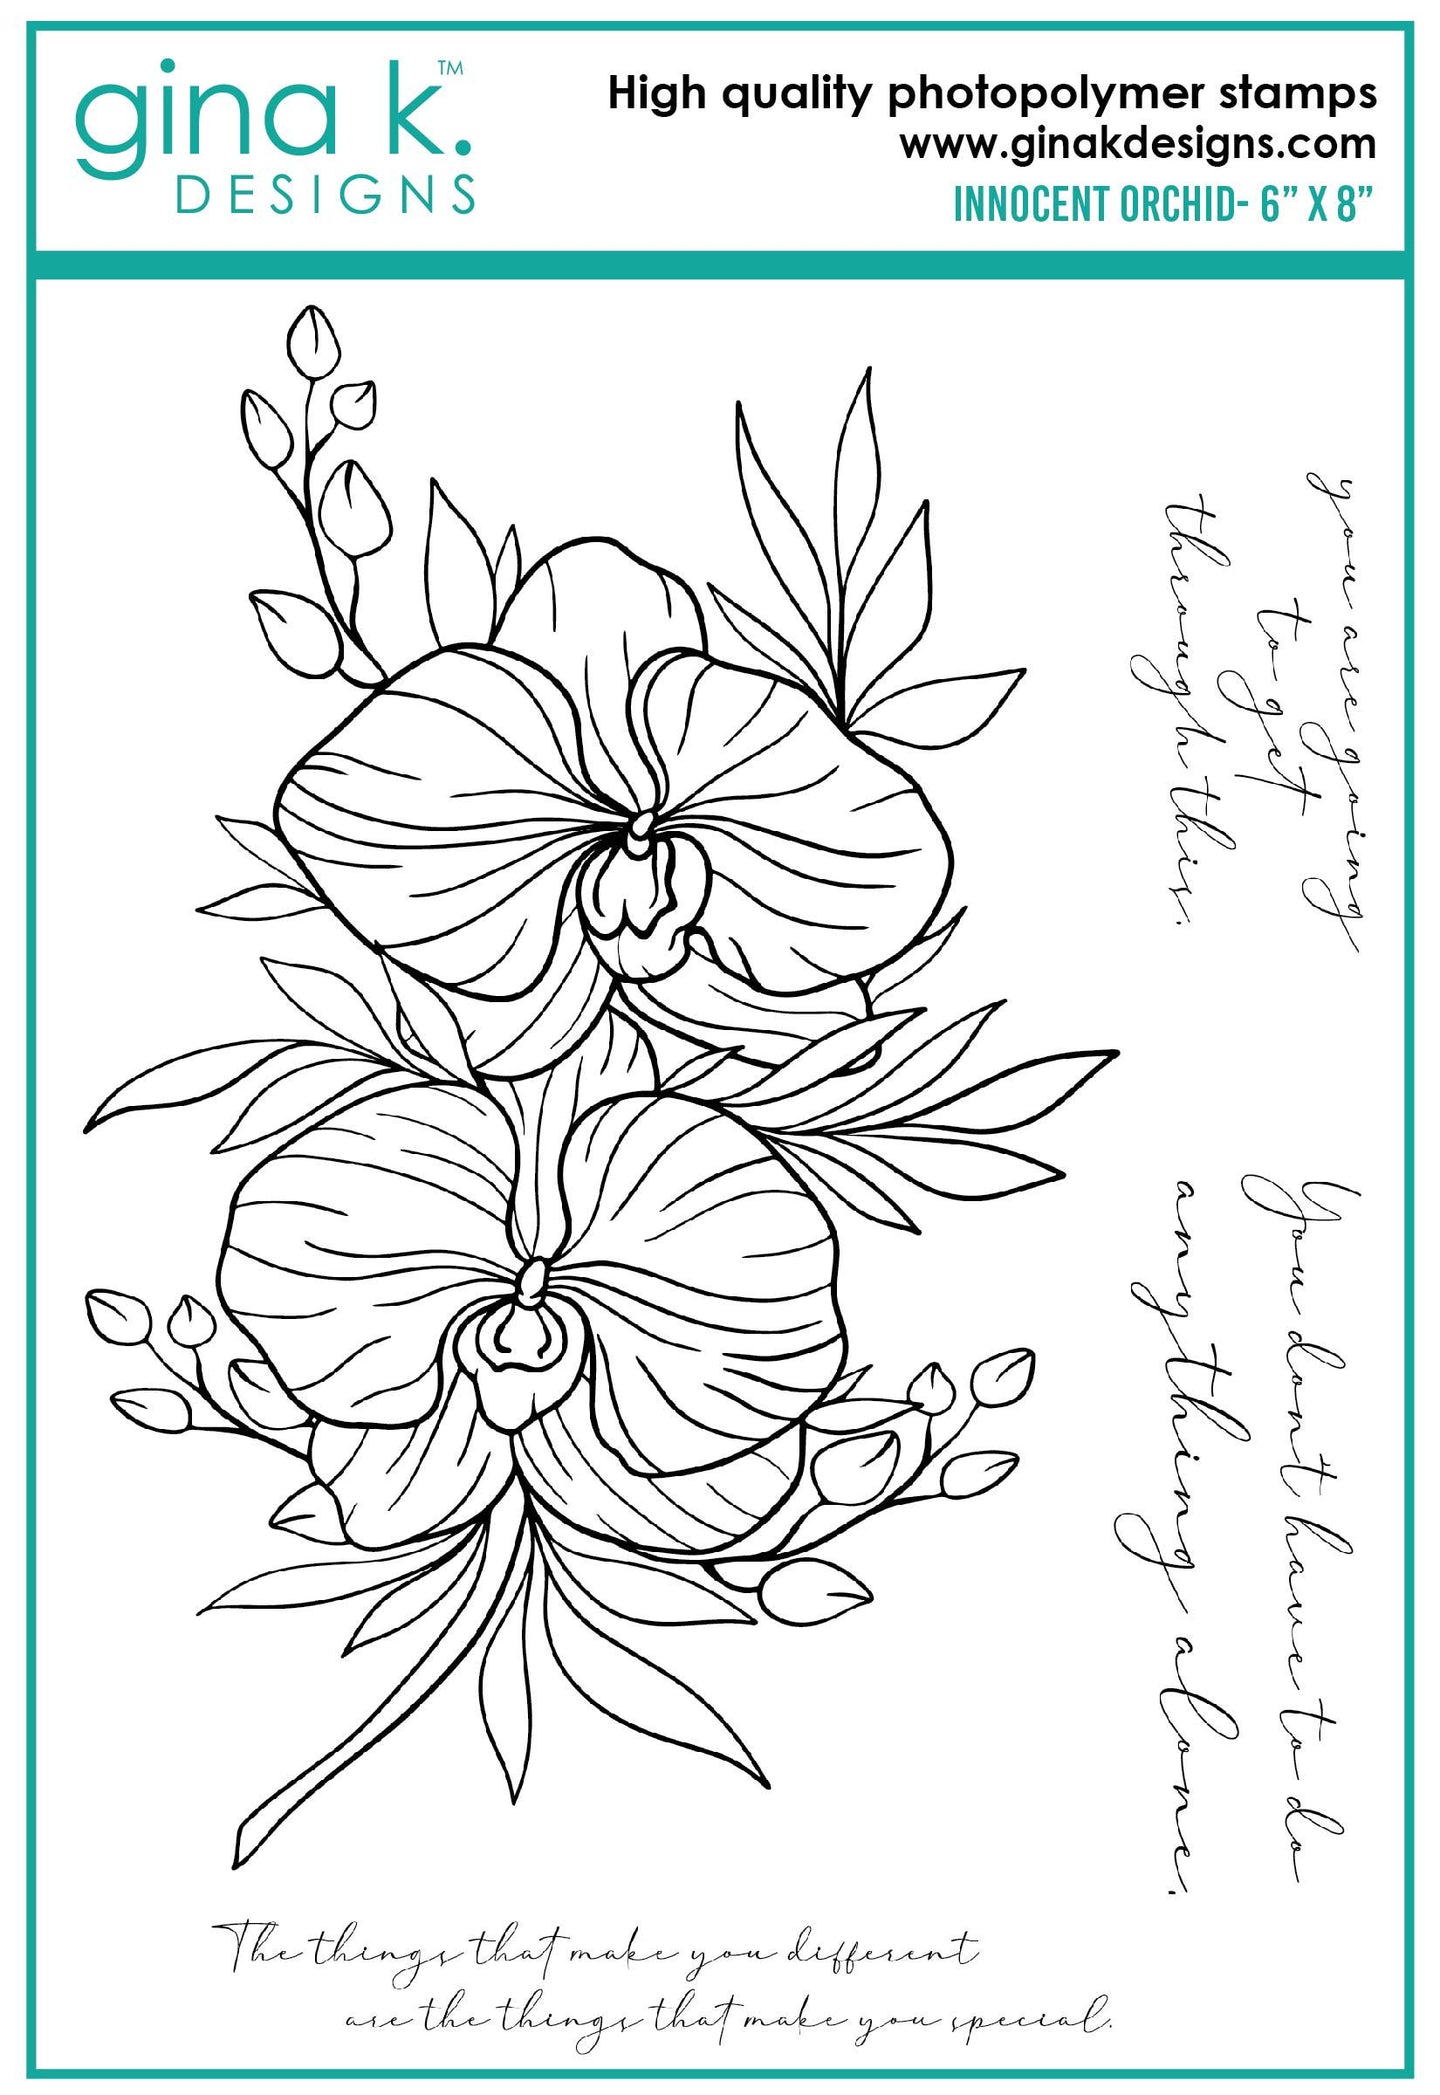 Innocent Orchid Stamps